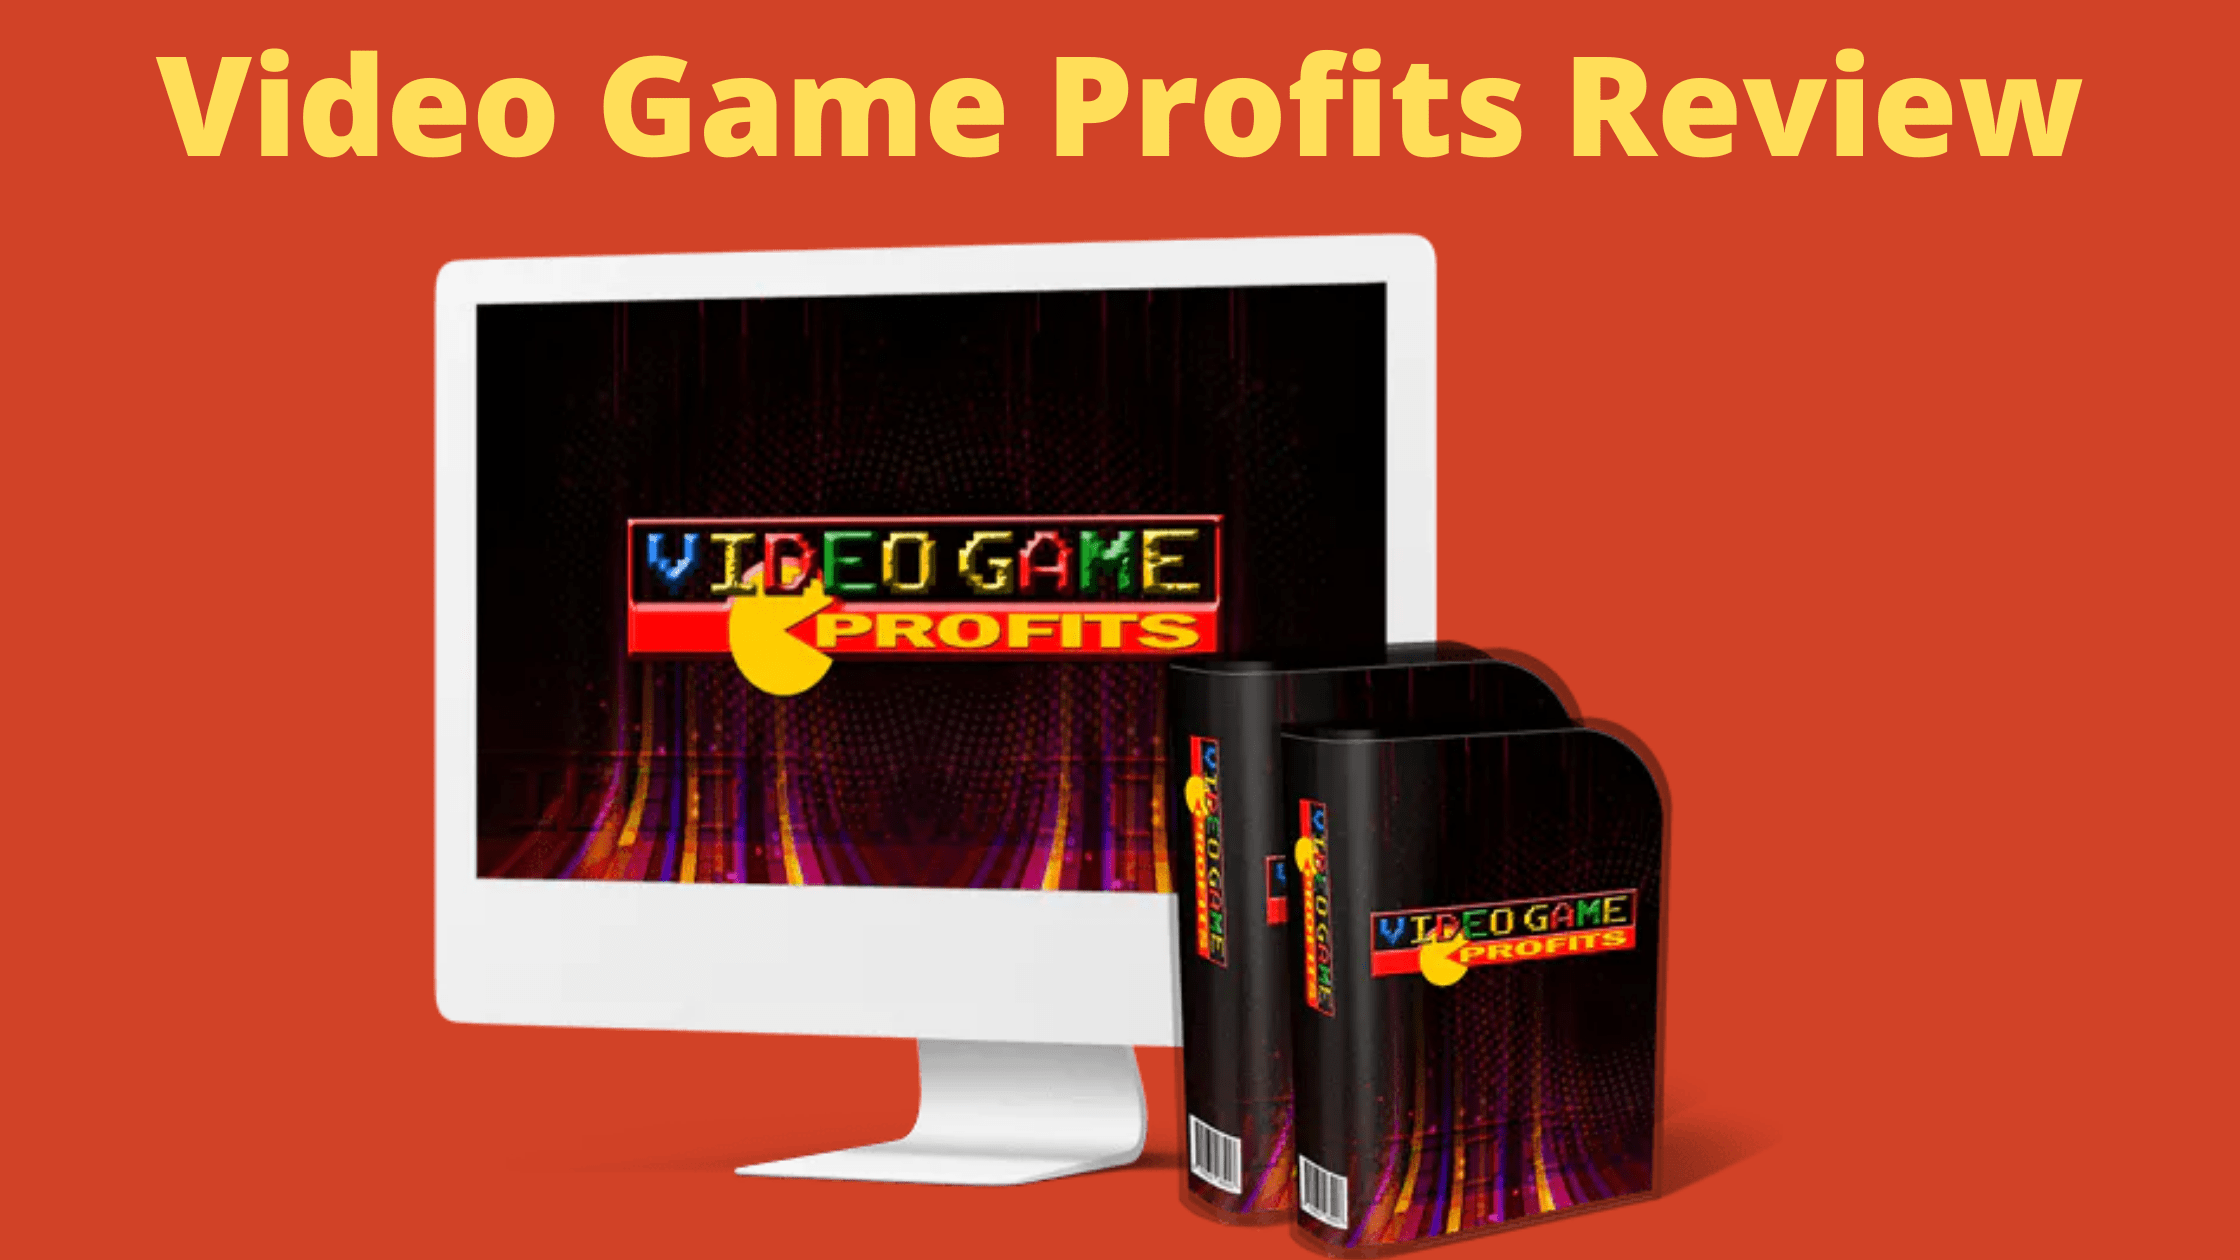 Video Game Profits Review